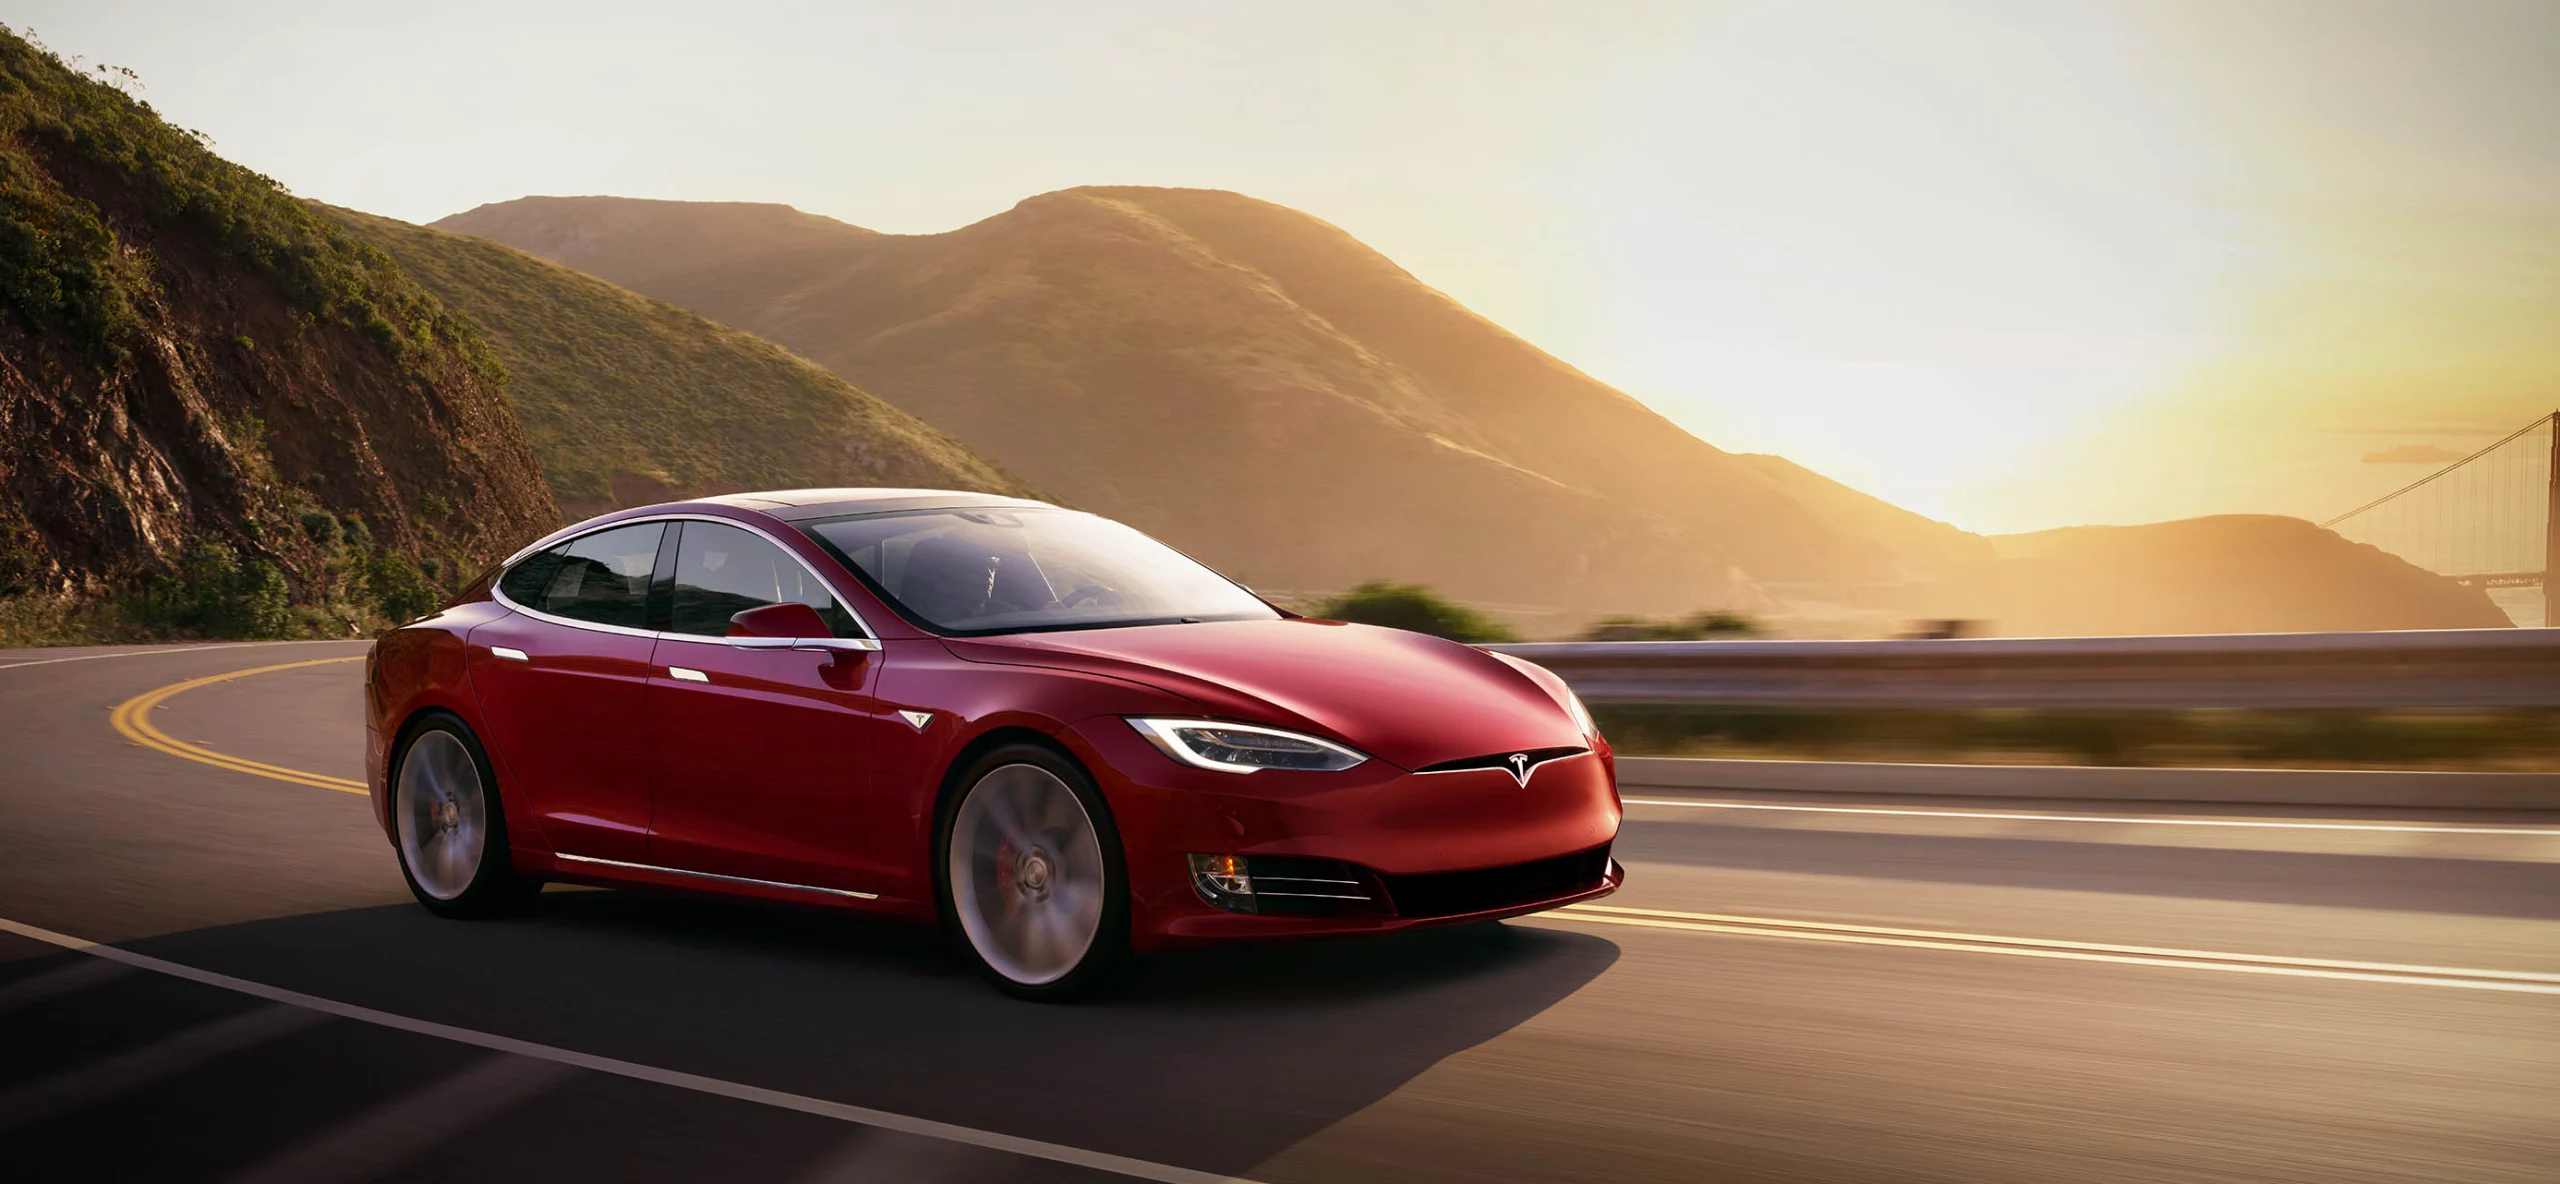 Tesla Hints at Entry Into Booming Indian Market, But Challenges Remain